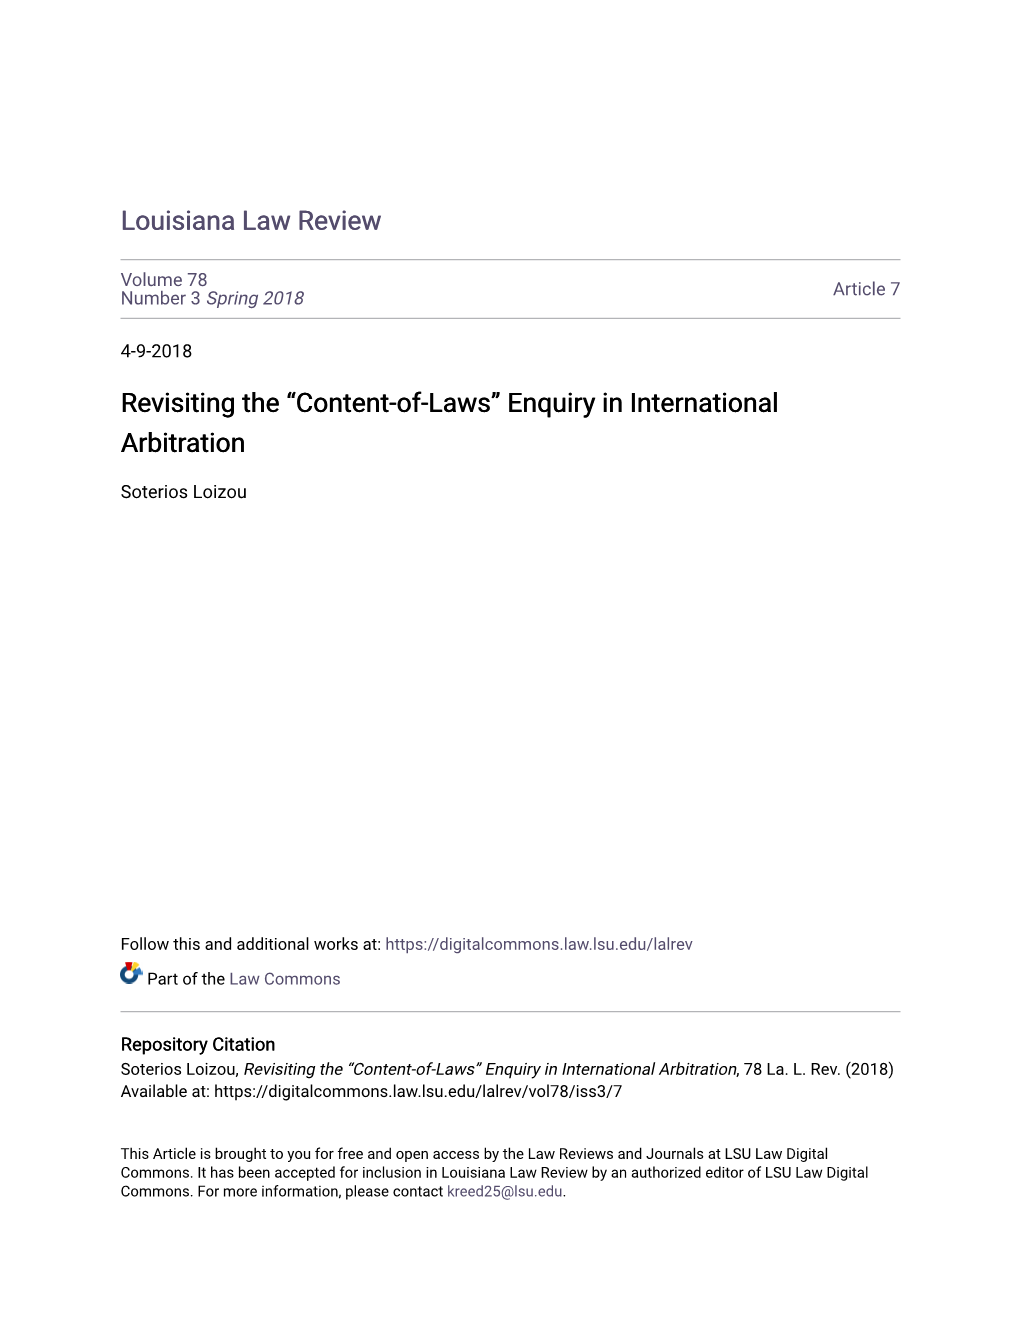 Revisiting the “Content-Of-Laws” Enquiry in International Arbitration